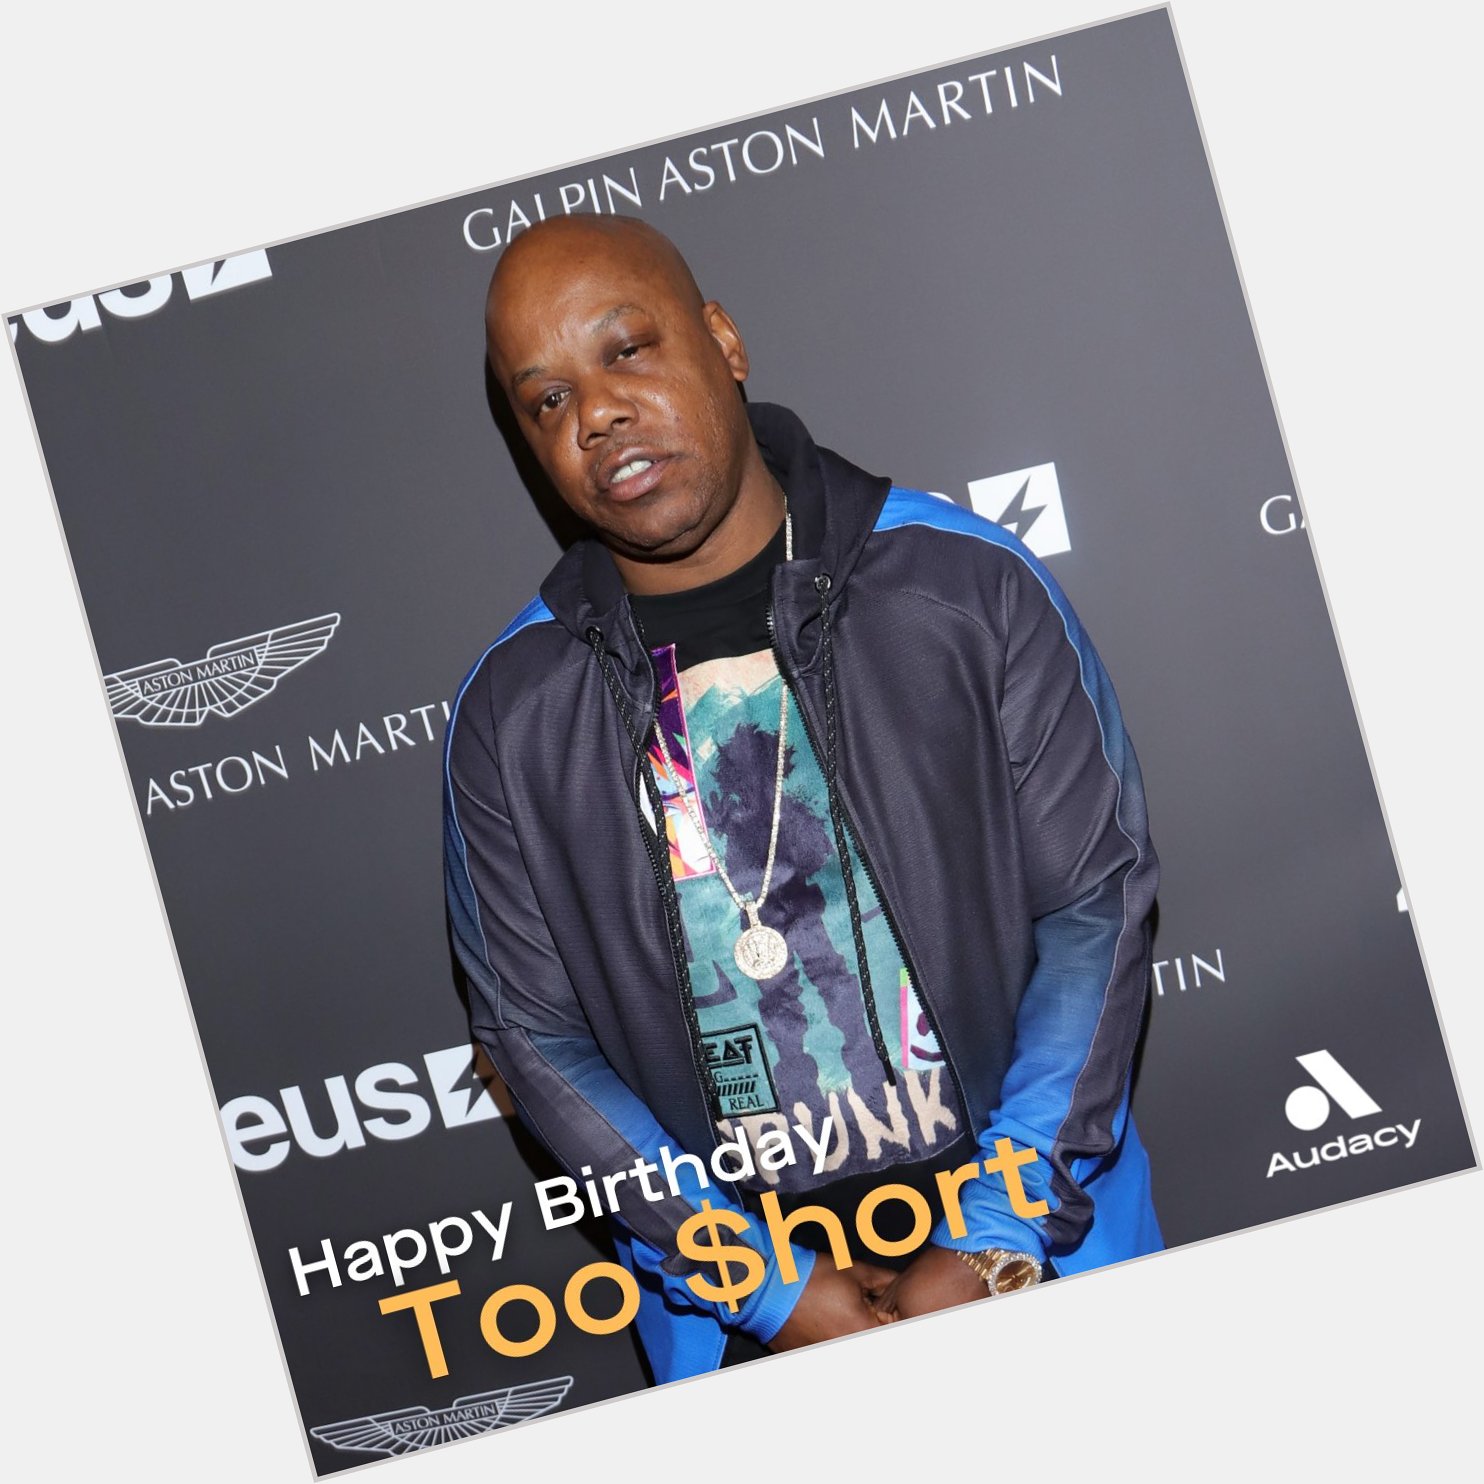 Happy birthday, Too $hort. What song of his is your favorite? Blow the whistle? Life is too $short? 